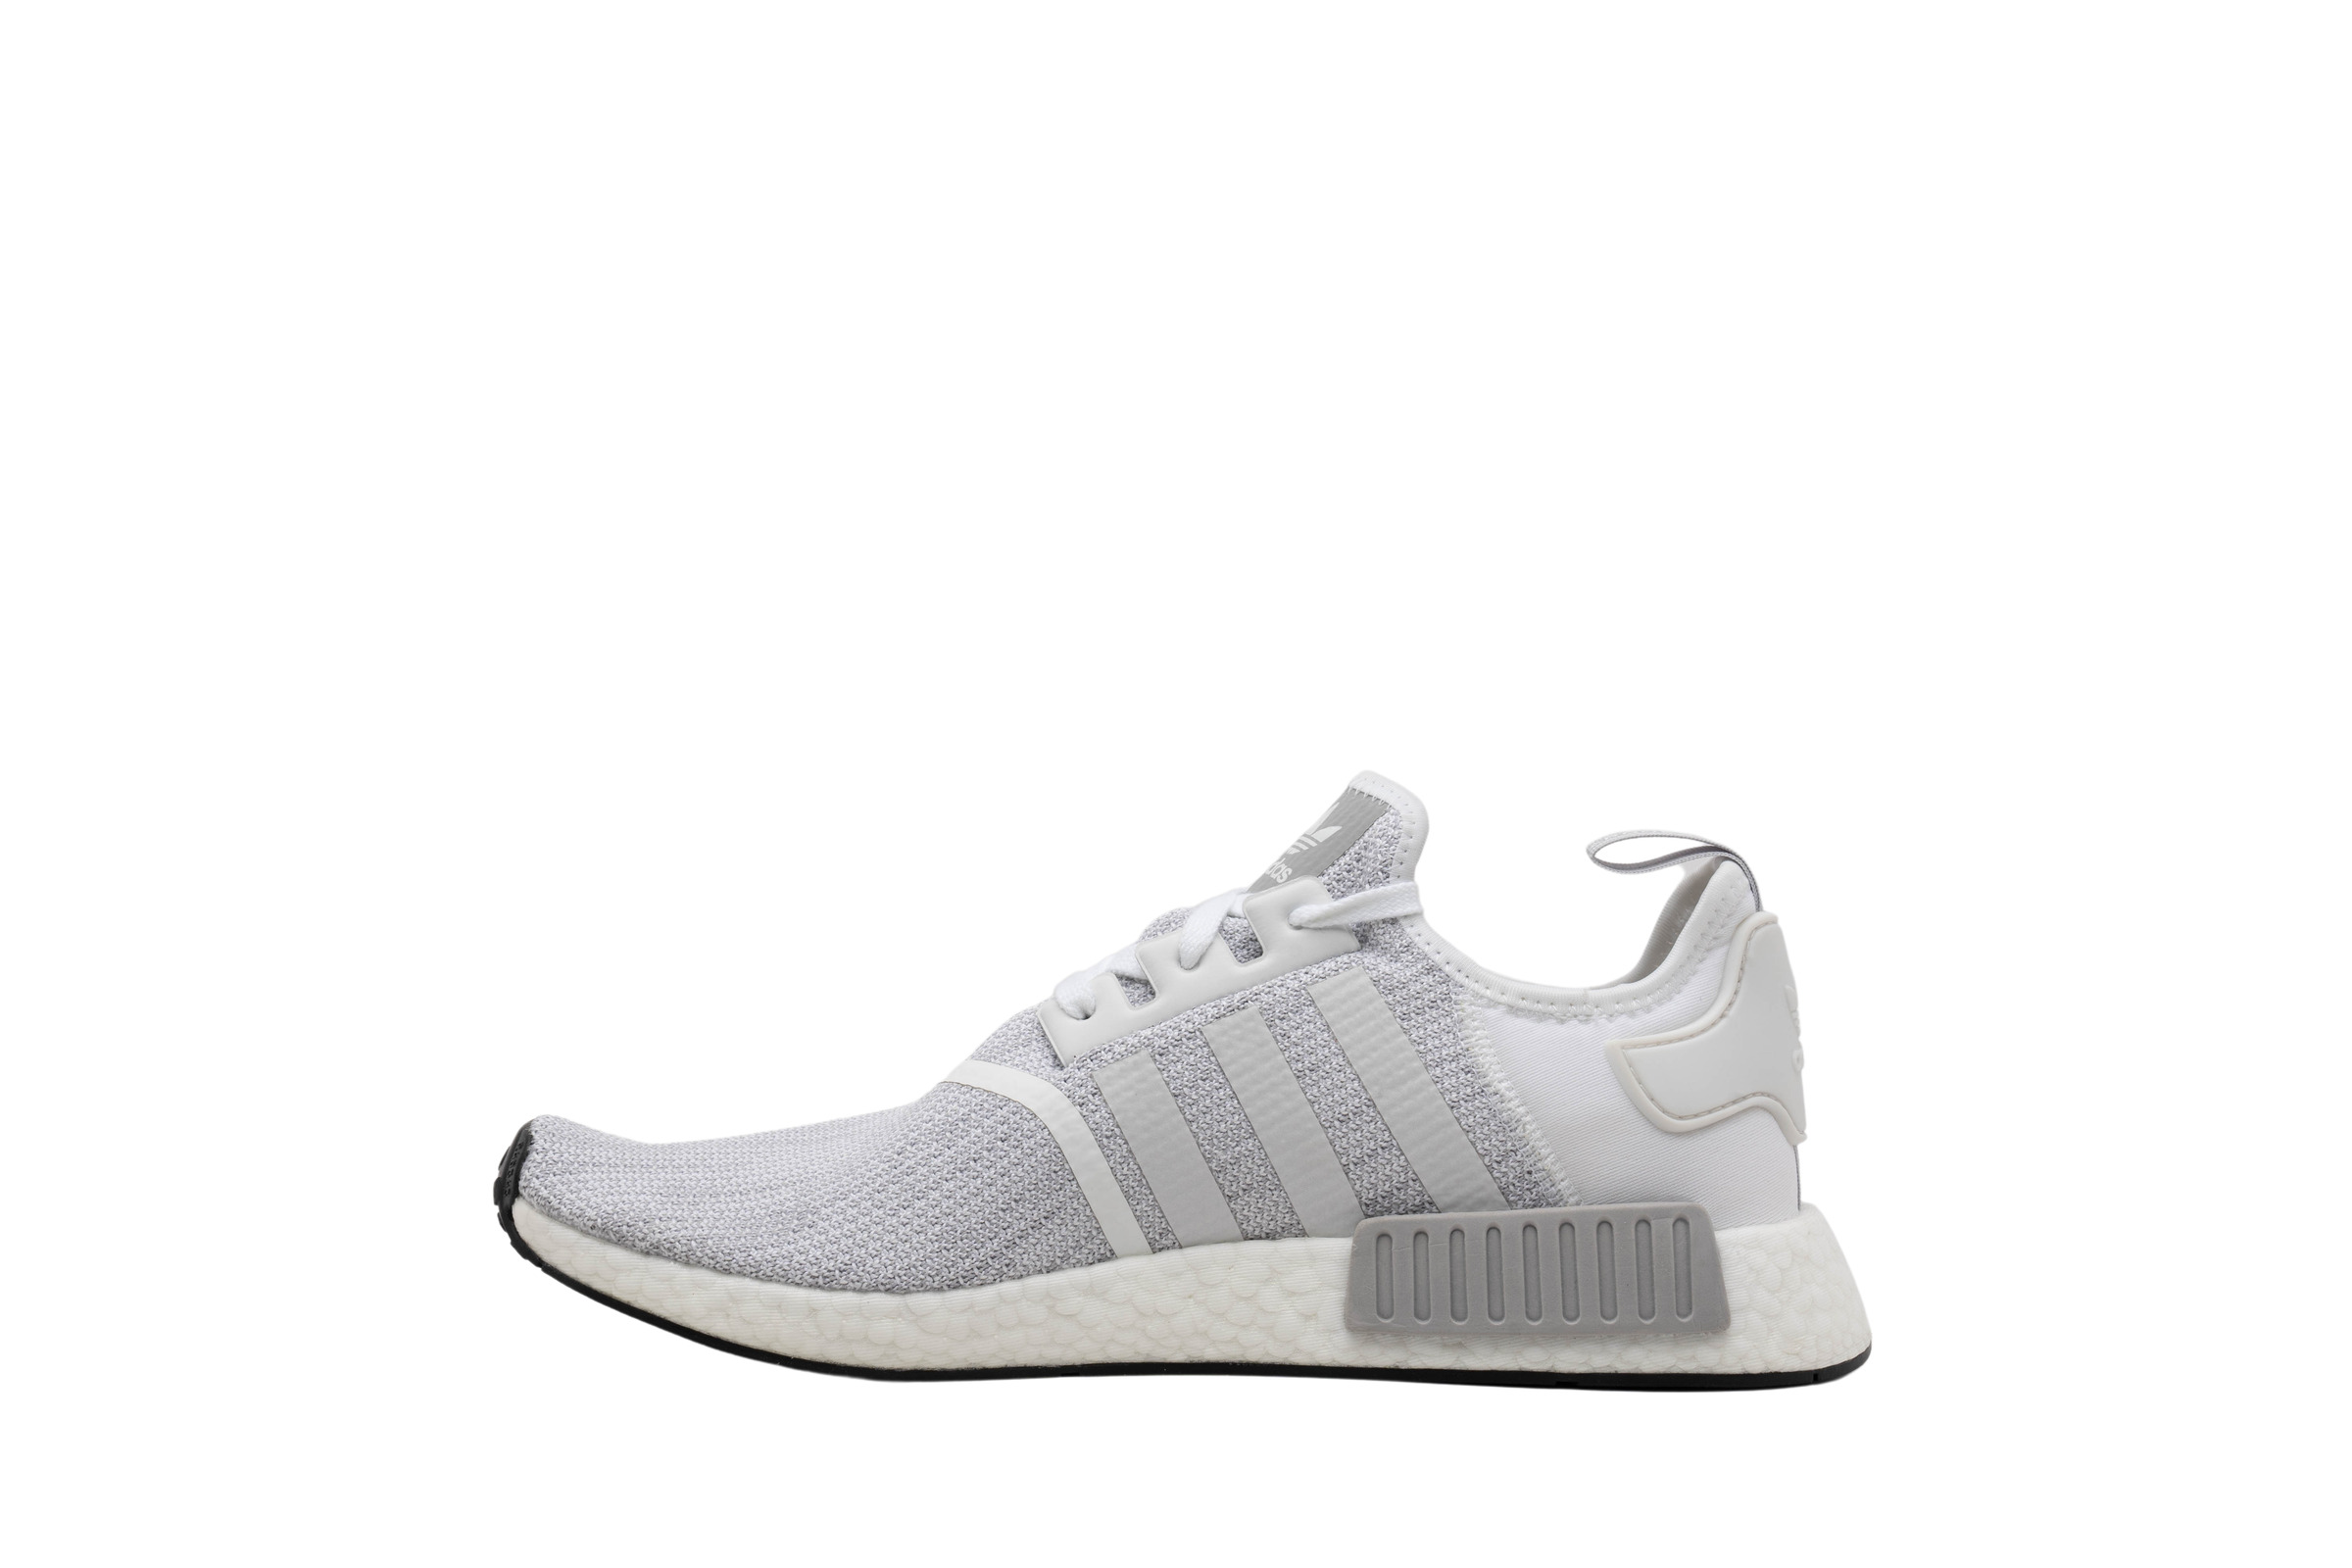 adidas NMD R1 Blizzard for Sale | Authenticity Guaranteed | eBay